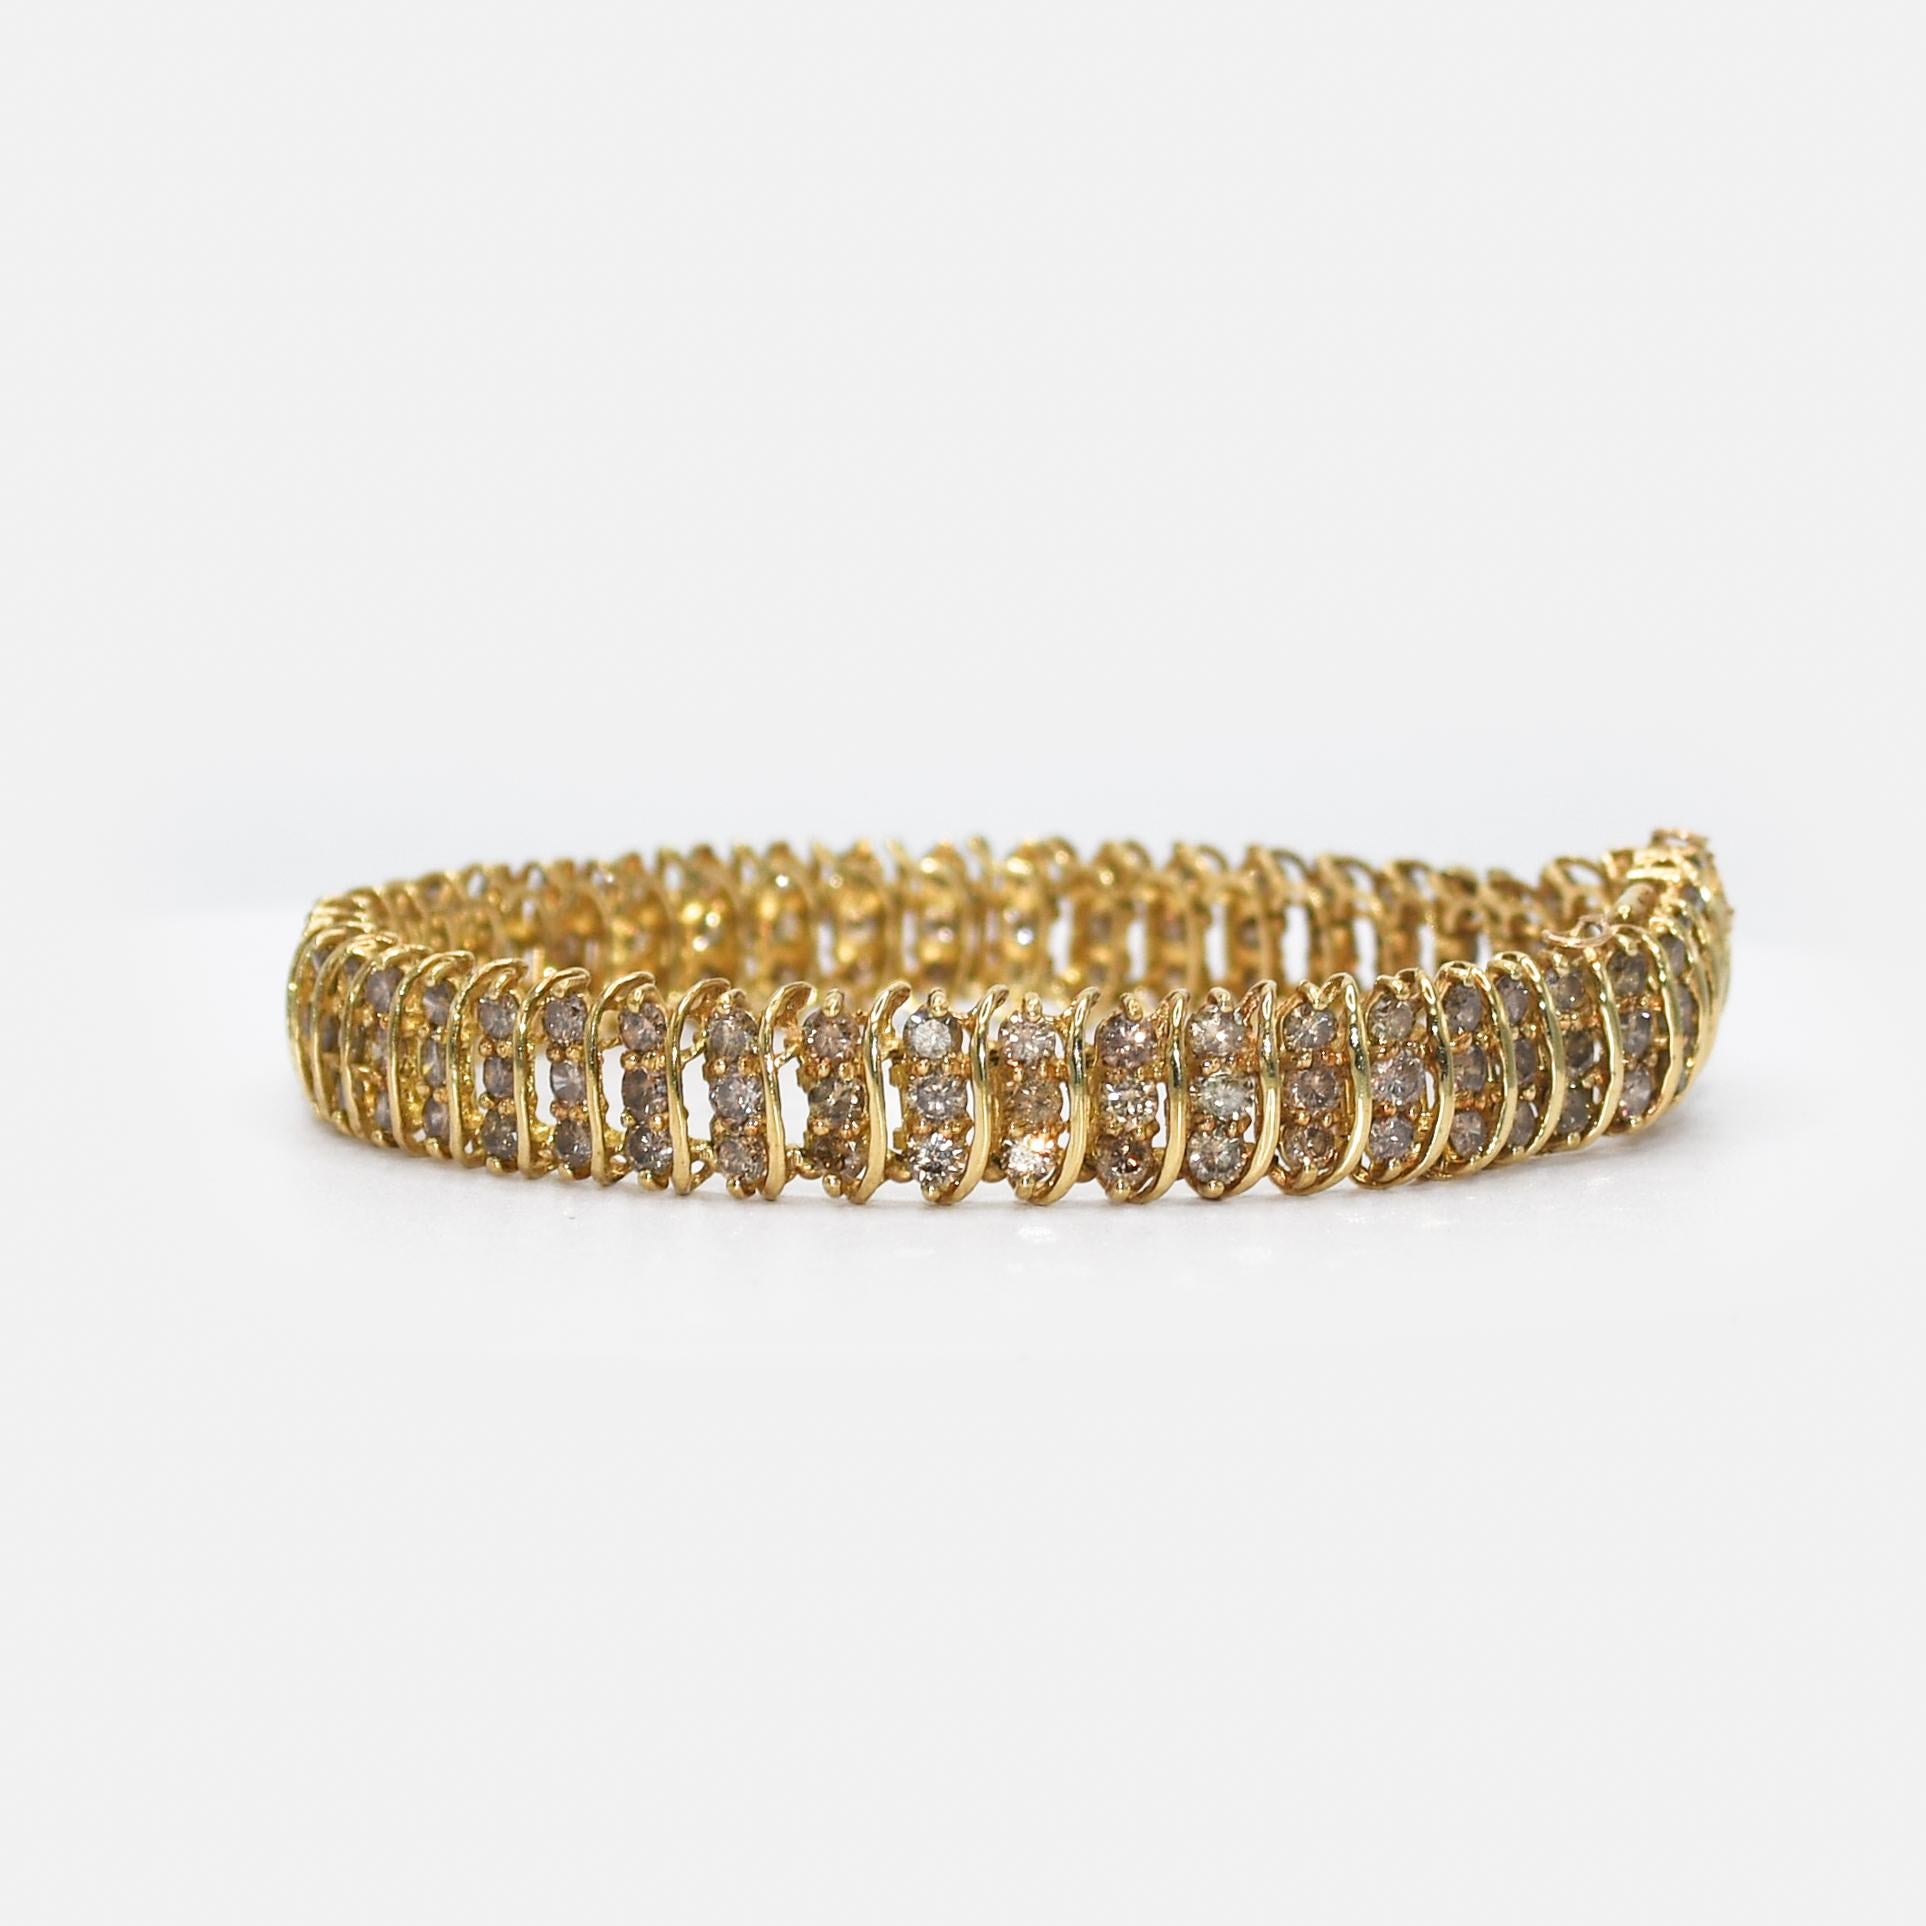 10k Yellow Gold Diamond Bracelet 7.00tcw, 17.2gr In Excellent Condition For Sale In Laguna Beach, CA